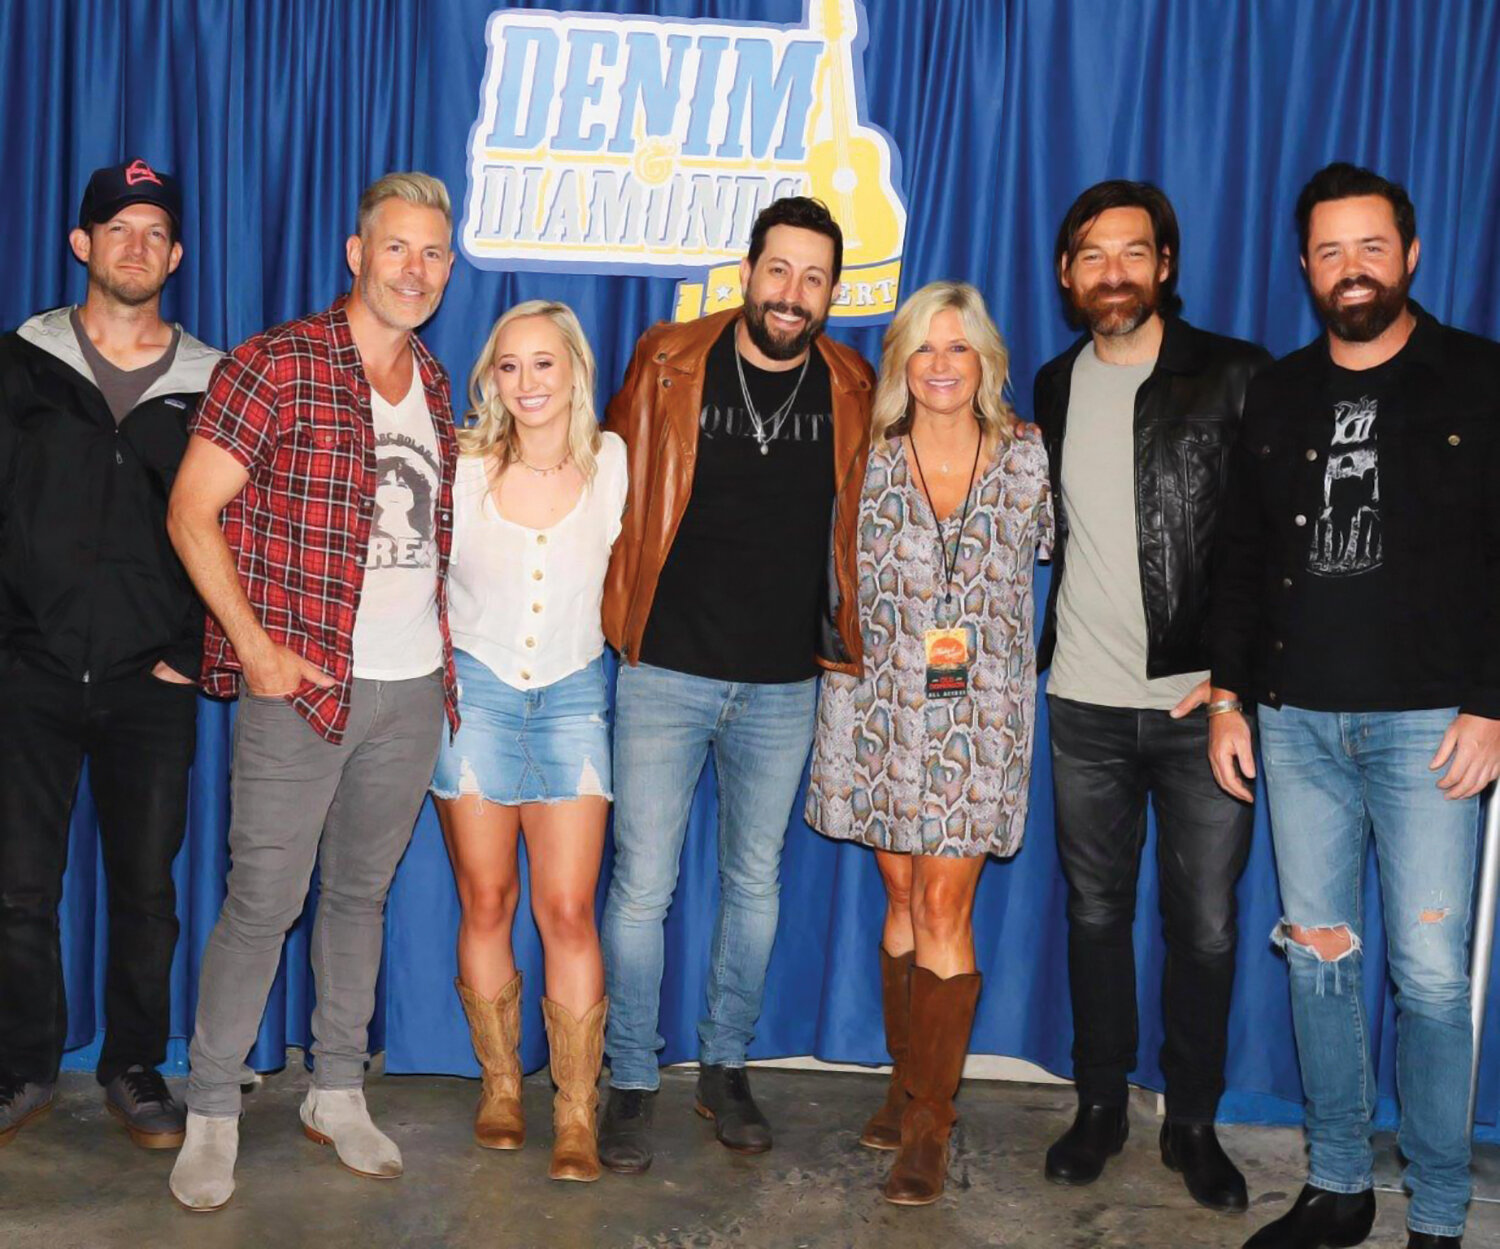 cmyk_Annie Roberts and Terri Roberts  with Old Dominion.jpg